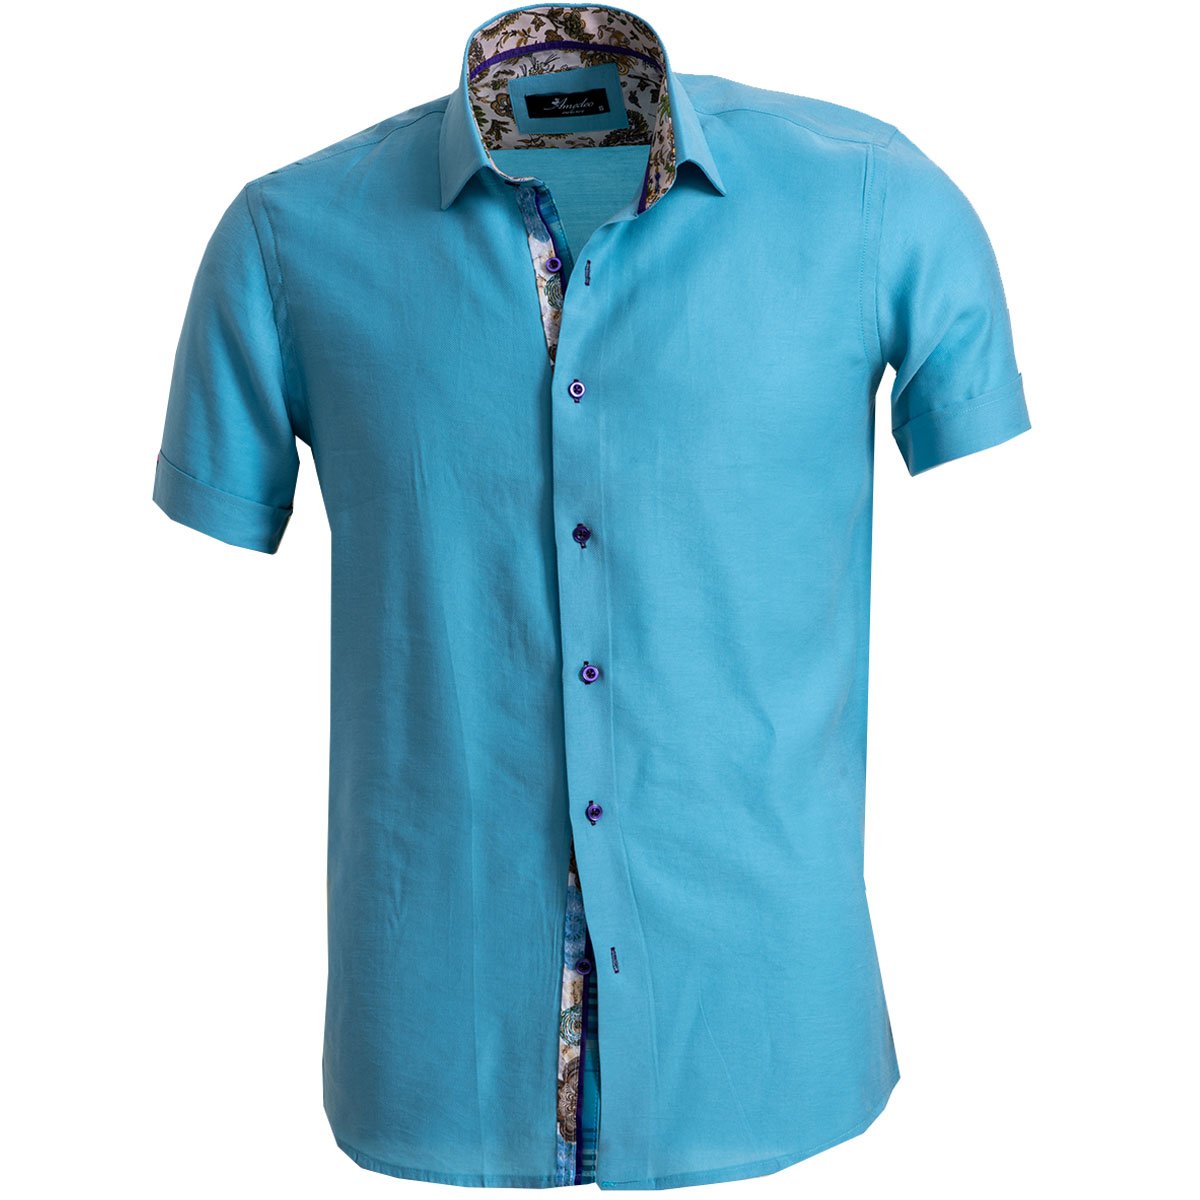 Men's Button down Tailor Fit Soft 100% Cotton Short Sleeve Dress Shirt Solid Turquoise Blue casual And Formal - Amedeo Exclusive